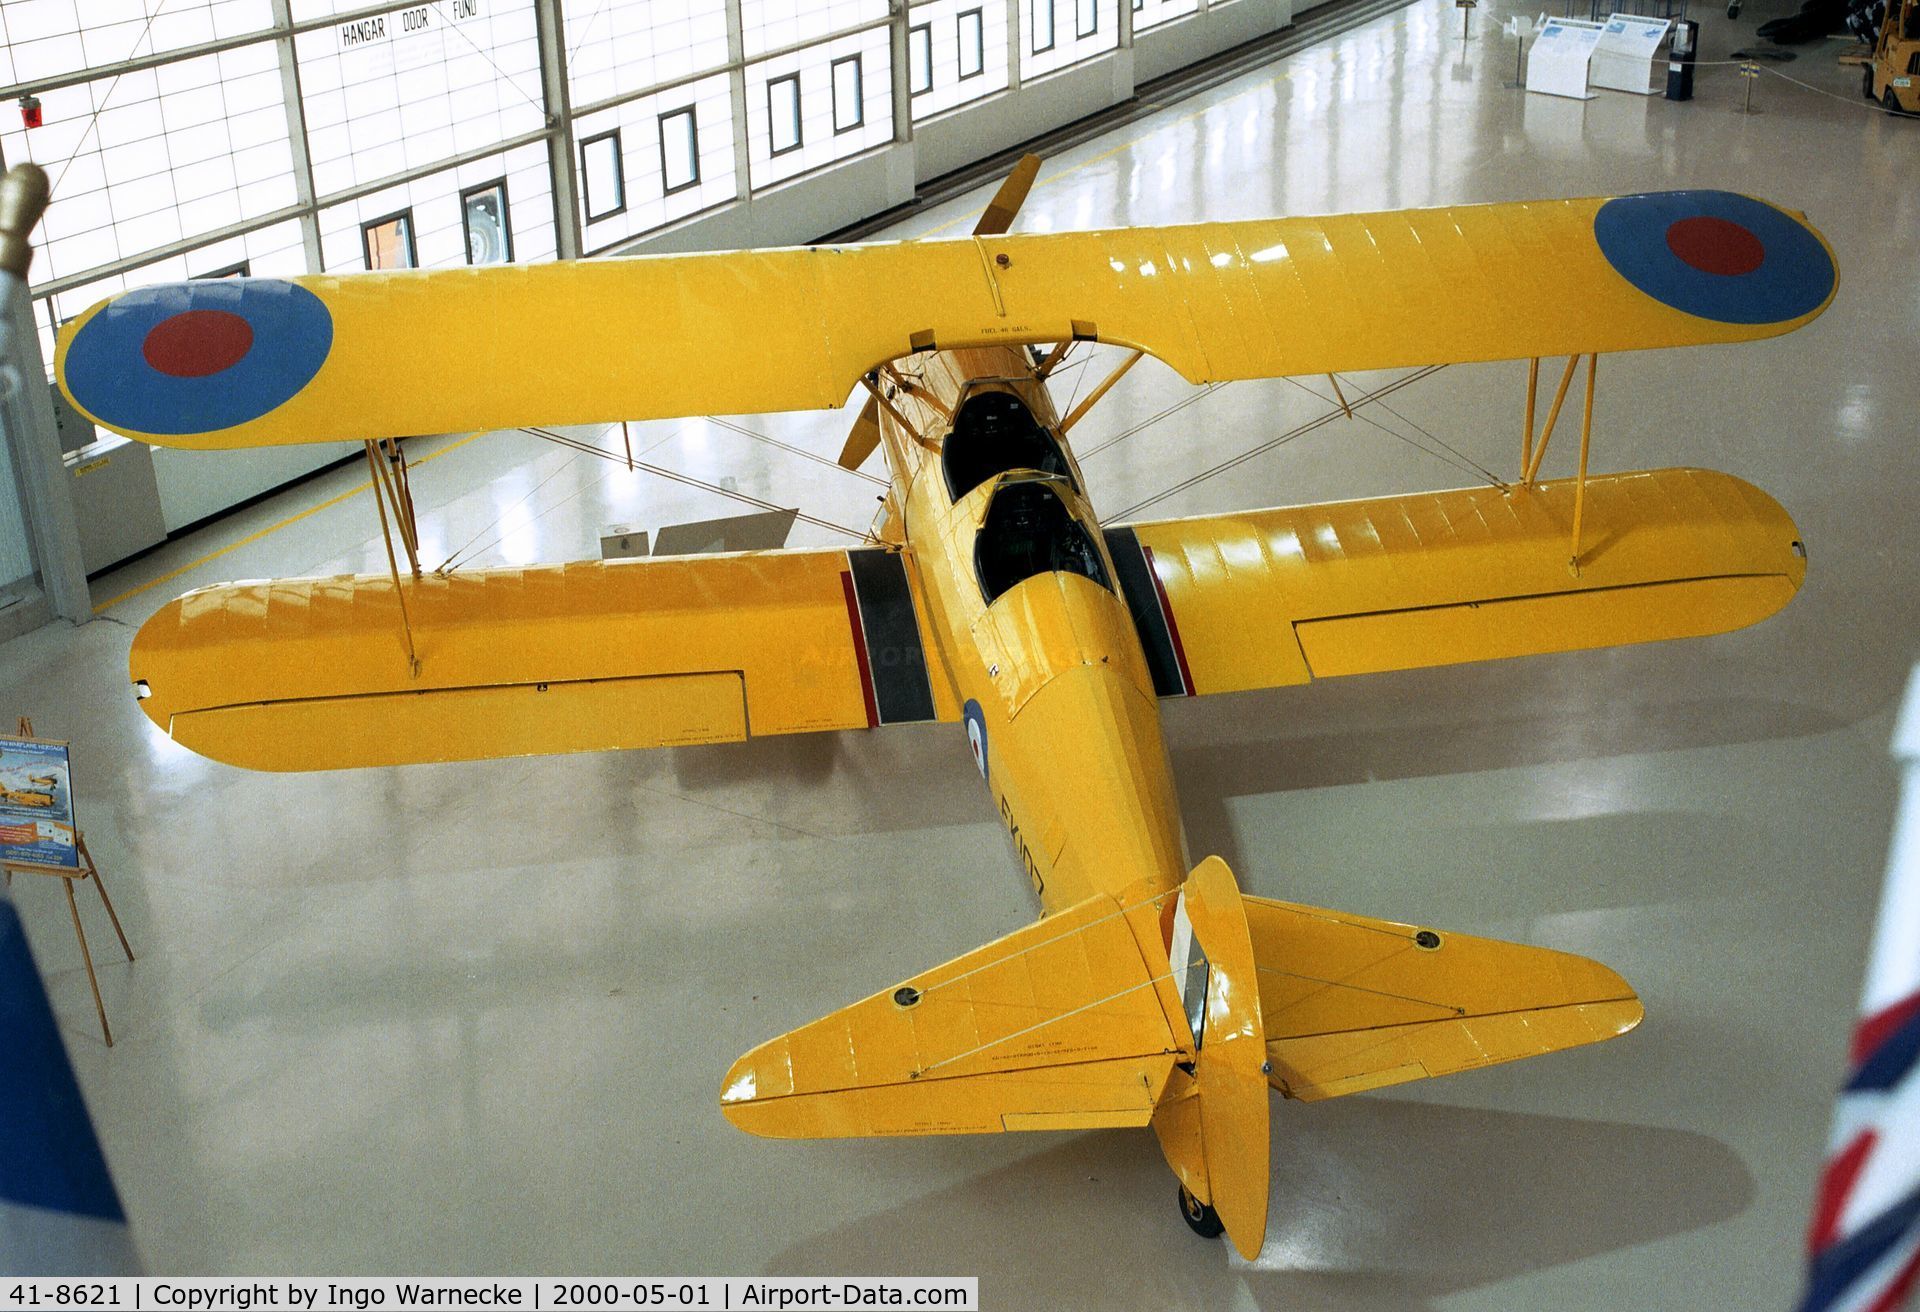 41-8621, Boeing PT-17 Kaydet (A75N1) C/N 75-2180, Stearman PT-17 (shown here in the markings of FK107 of the RCAF) at the Canadian Warplane Heritage Museum, Hamilton Ontario